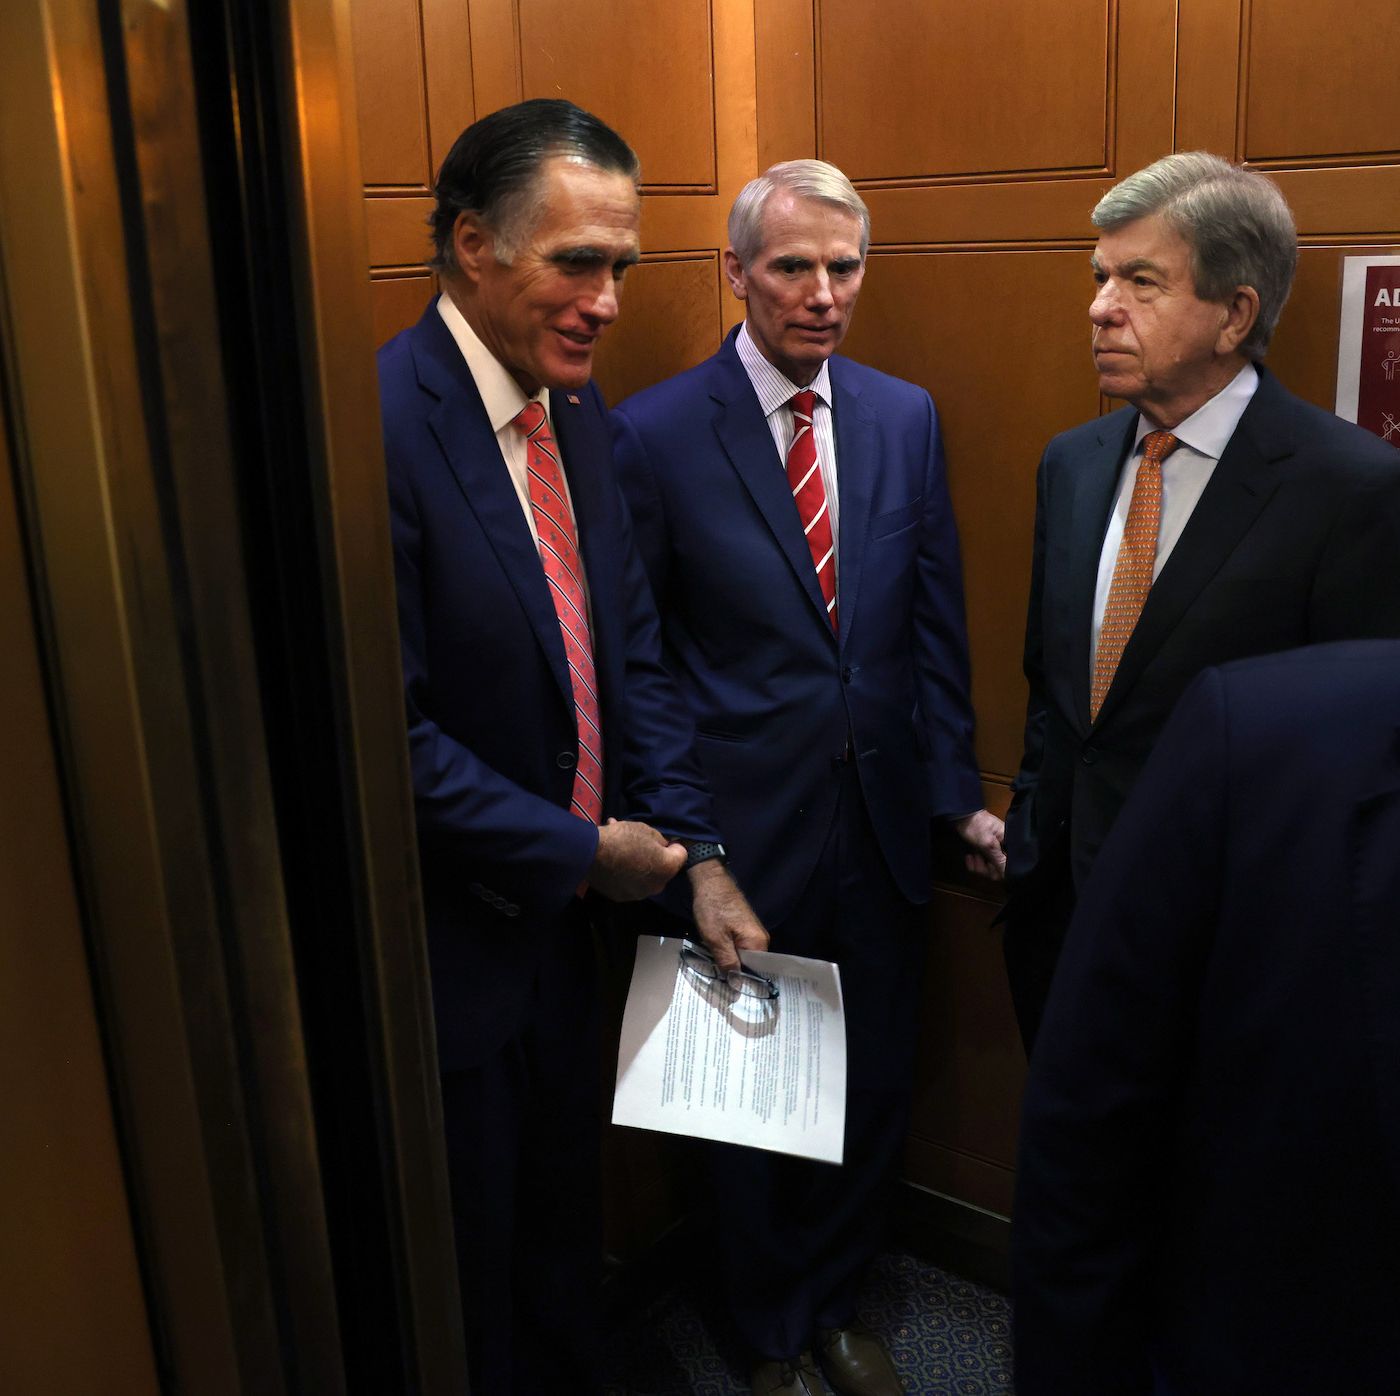 Why Won't These Retiring Republican Senators Support a Voting Rights Bill?